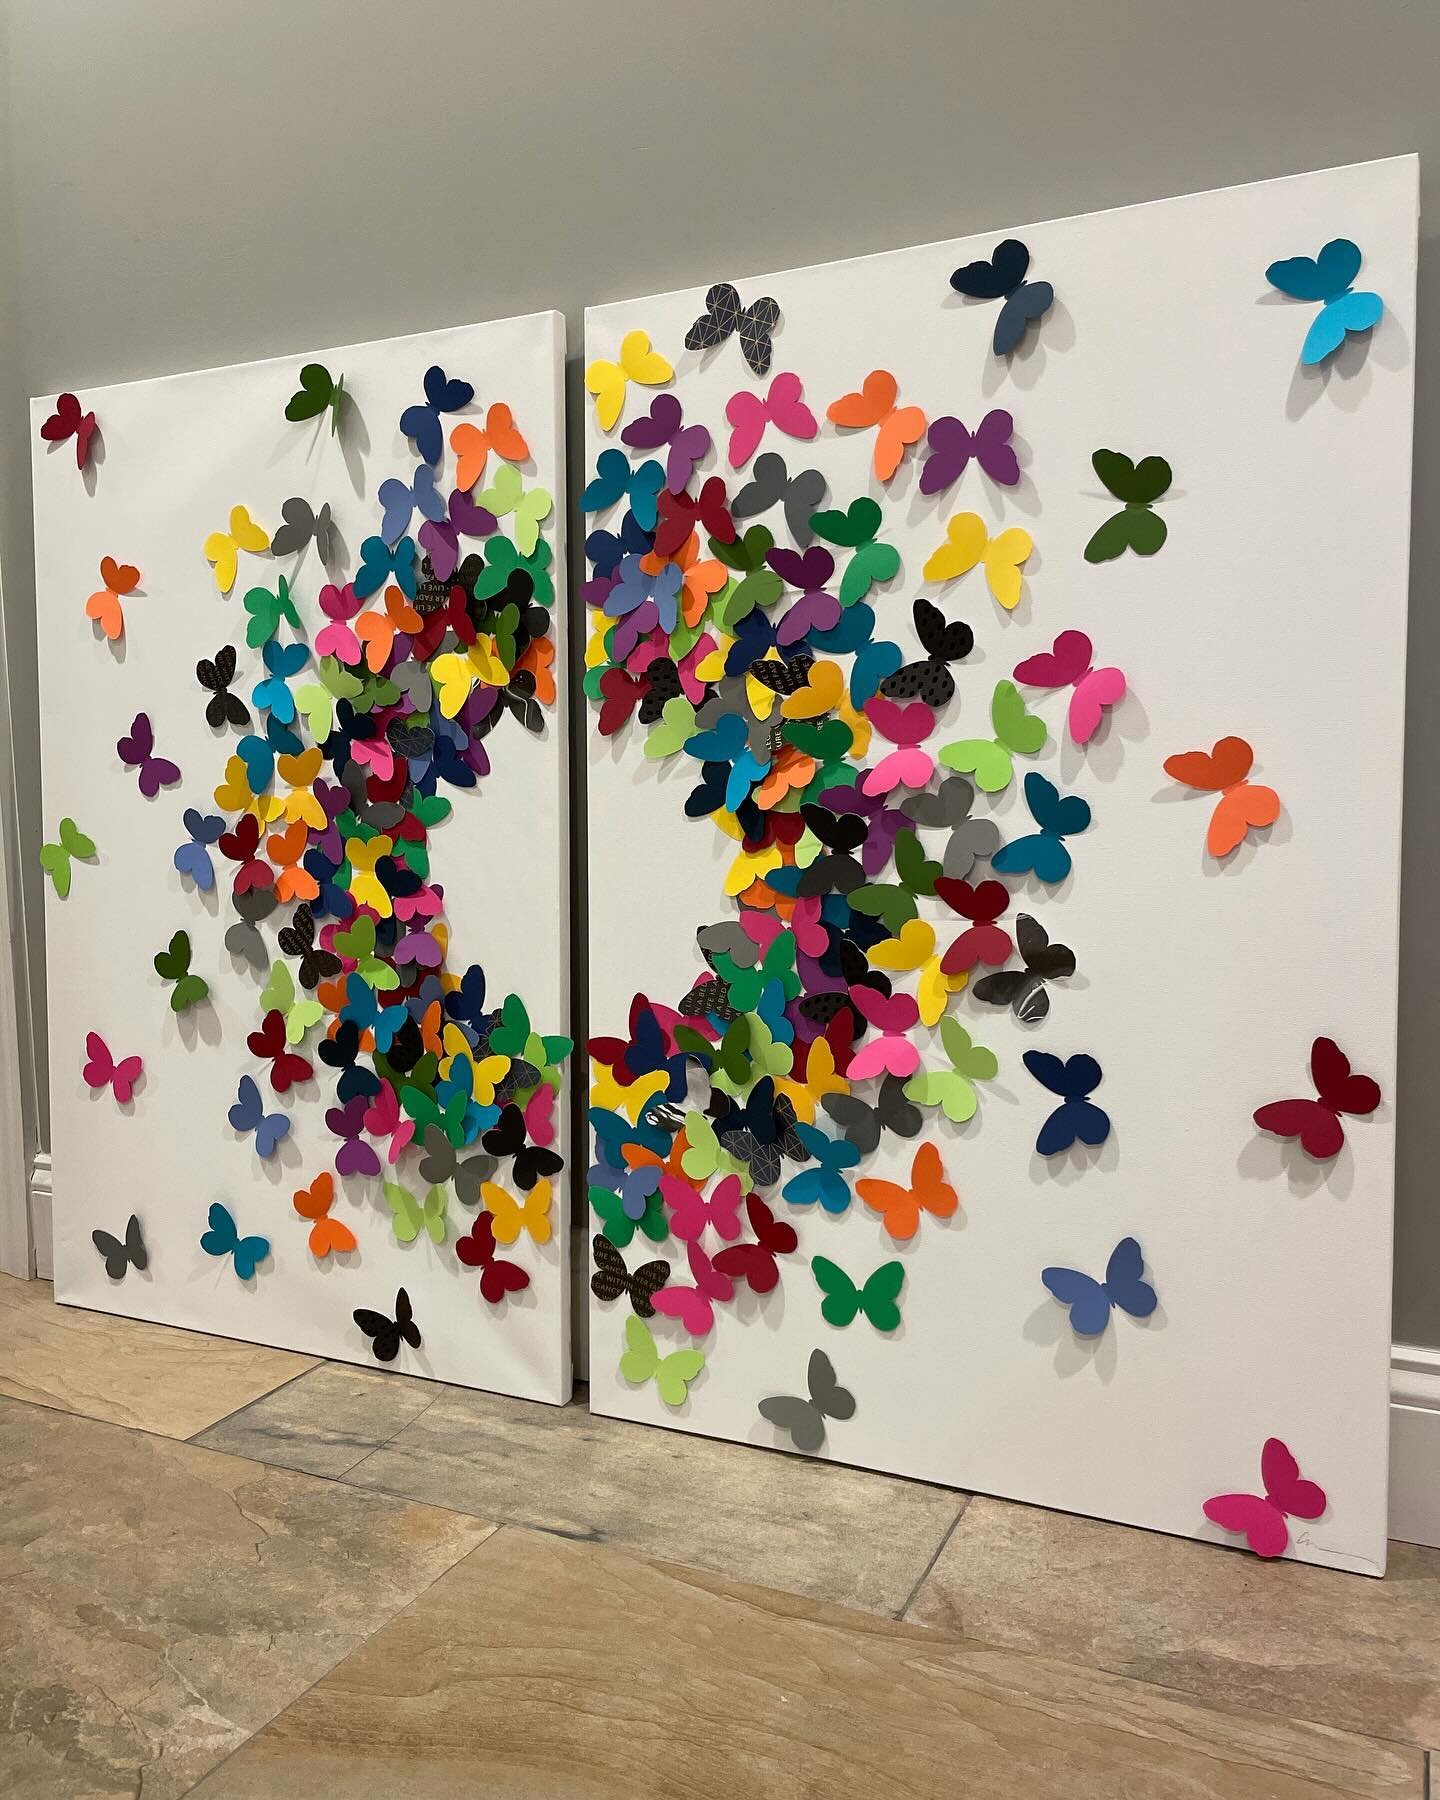 It&rsquo;s been a while since I&rsquo;ve made my sculptural paper art. Couldn&rsquo;t think of a better time to bring in some color, texture, and that secret sauce of a touch of whimsy. Each canvas is 36&rdquo;x24&rdquo; and ready to hang. DM me for 